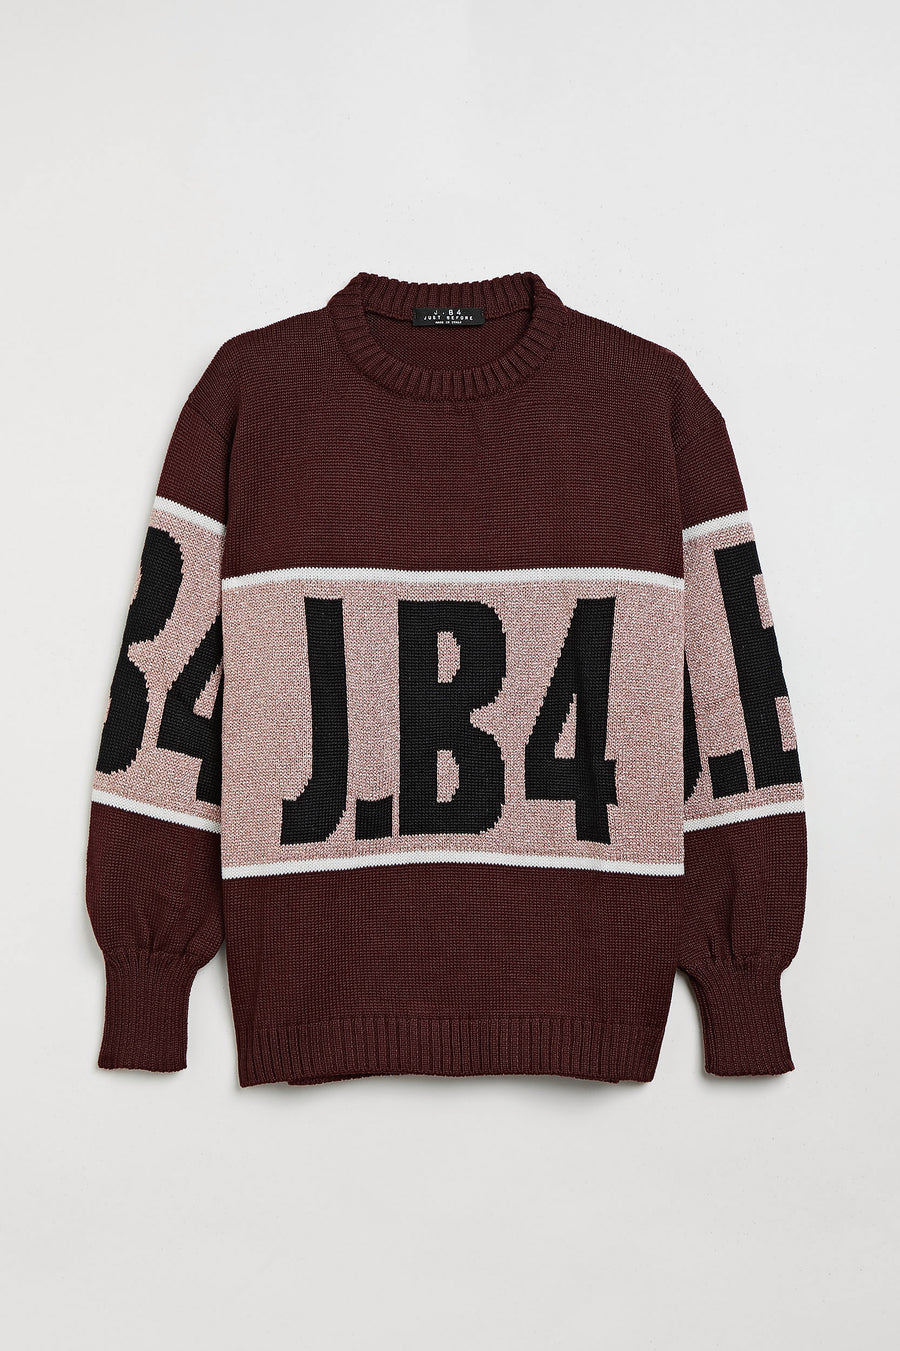 J.B4 RED AND PINK LOGO SWEATER